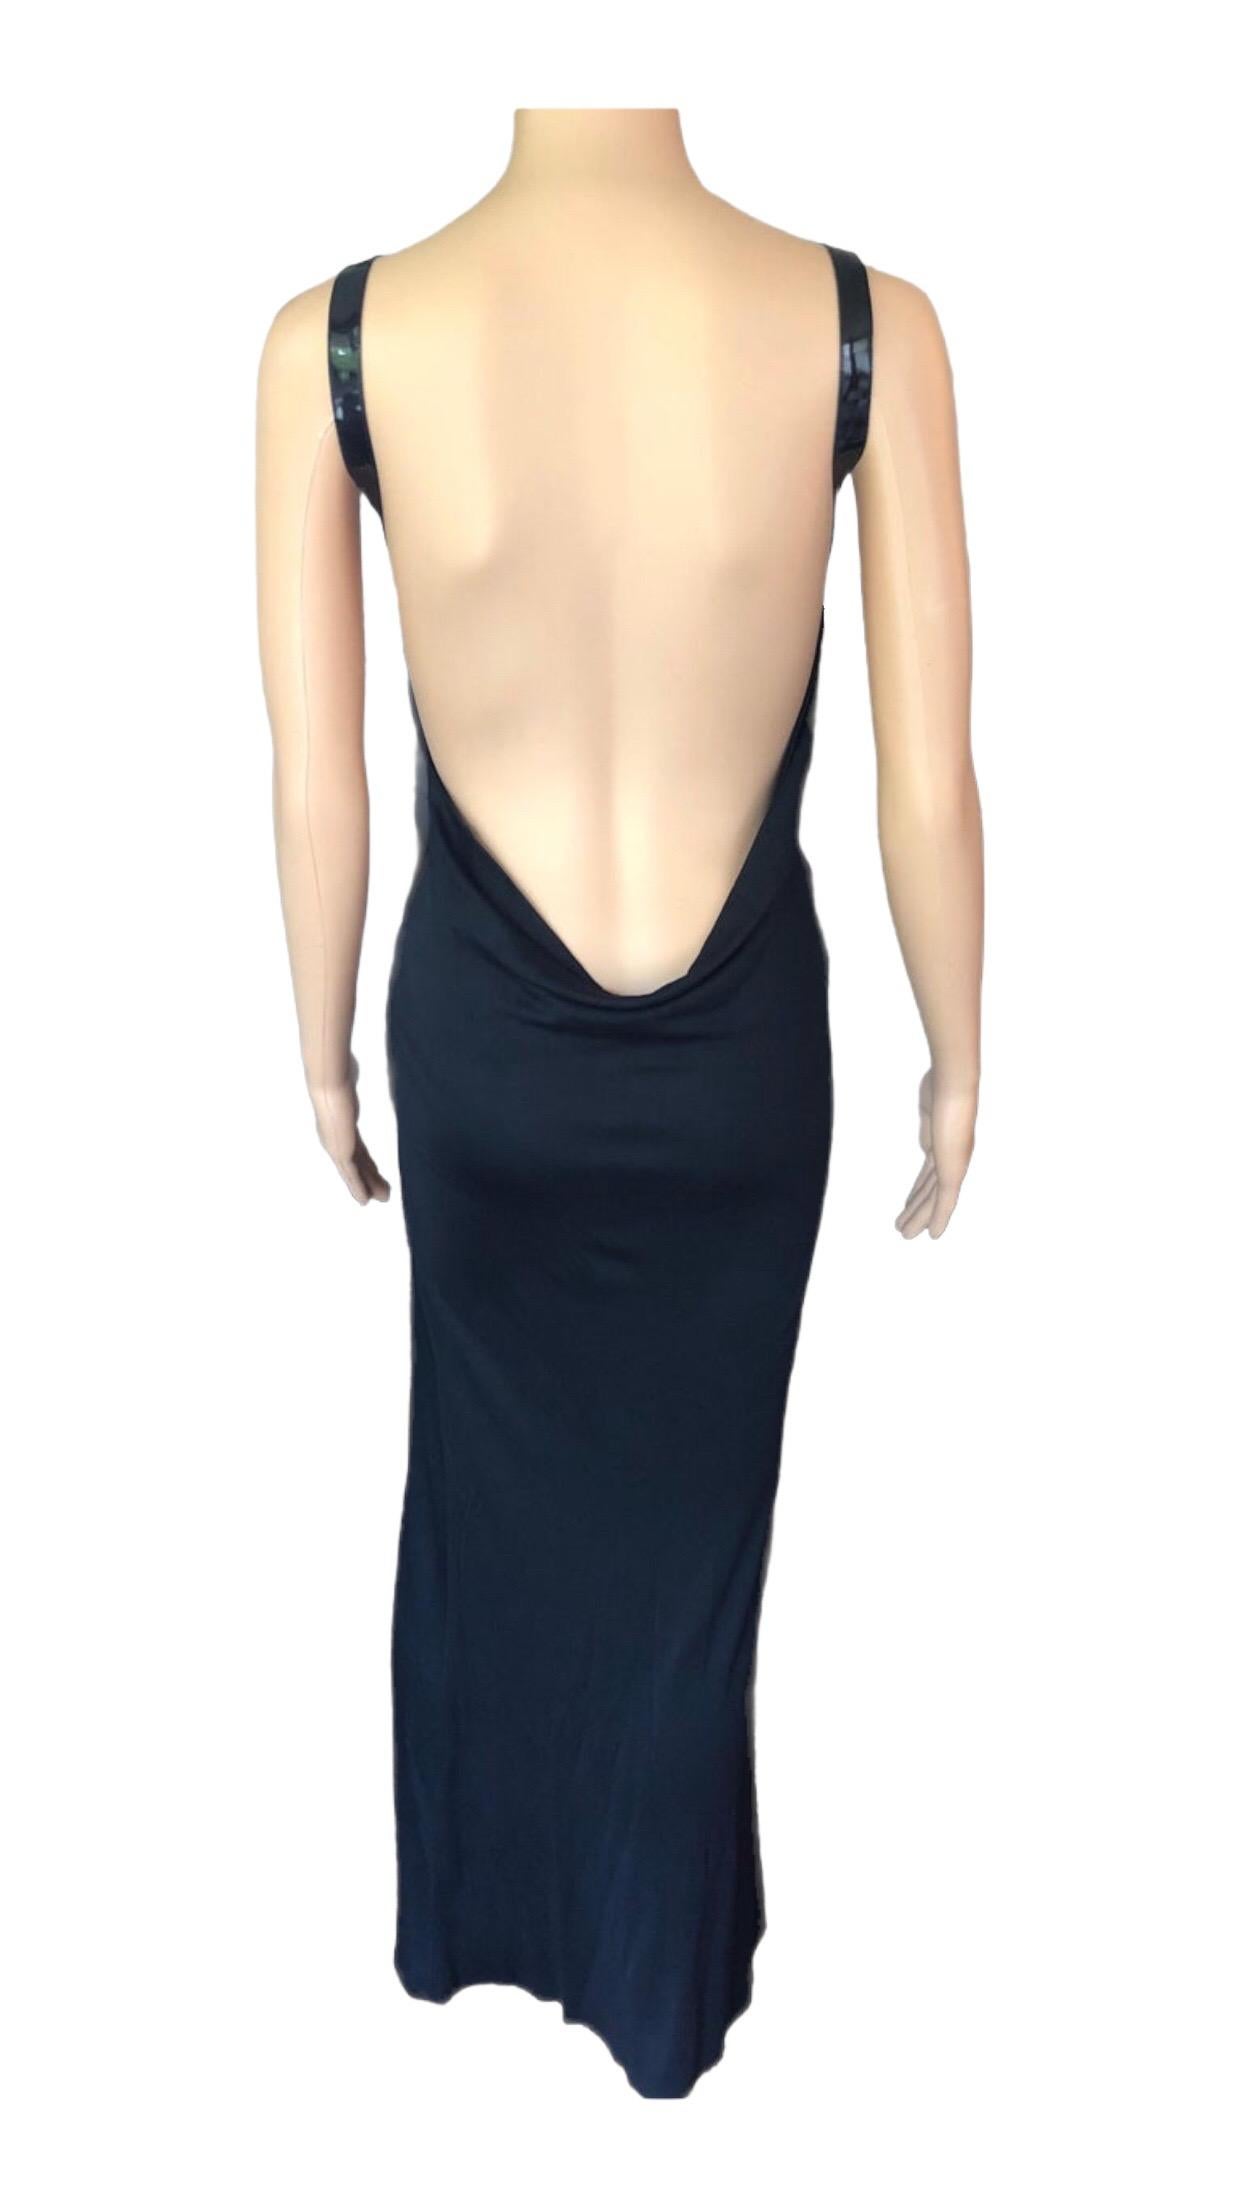 1999 Gucci by Tom Ford Silk Draped Open Back Black Dress Gown For Sale 1